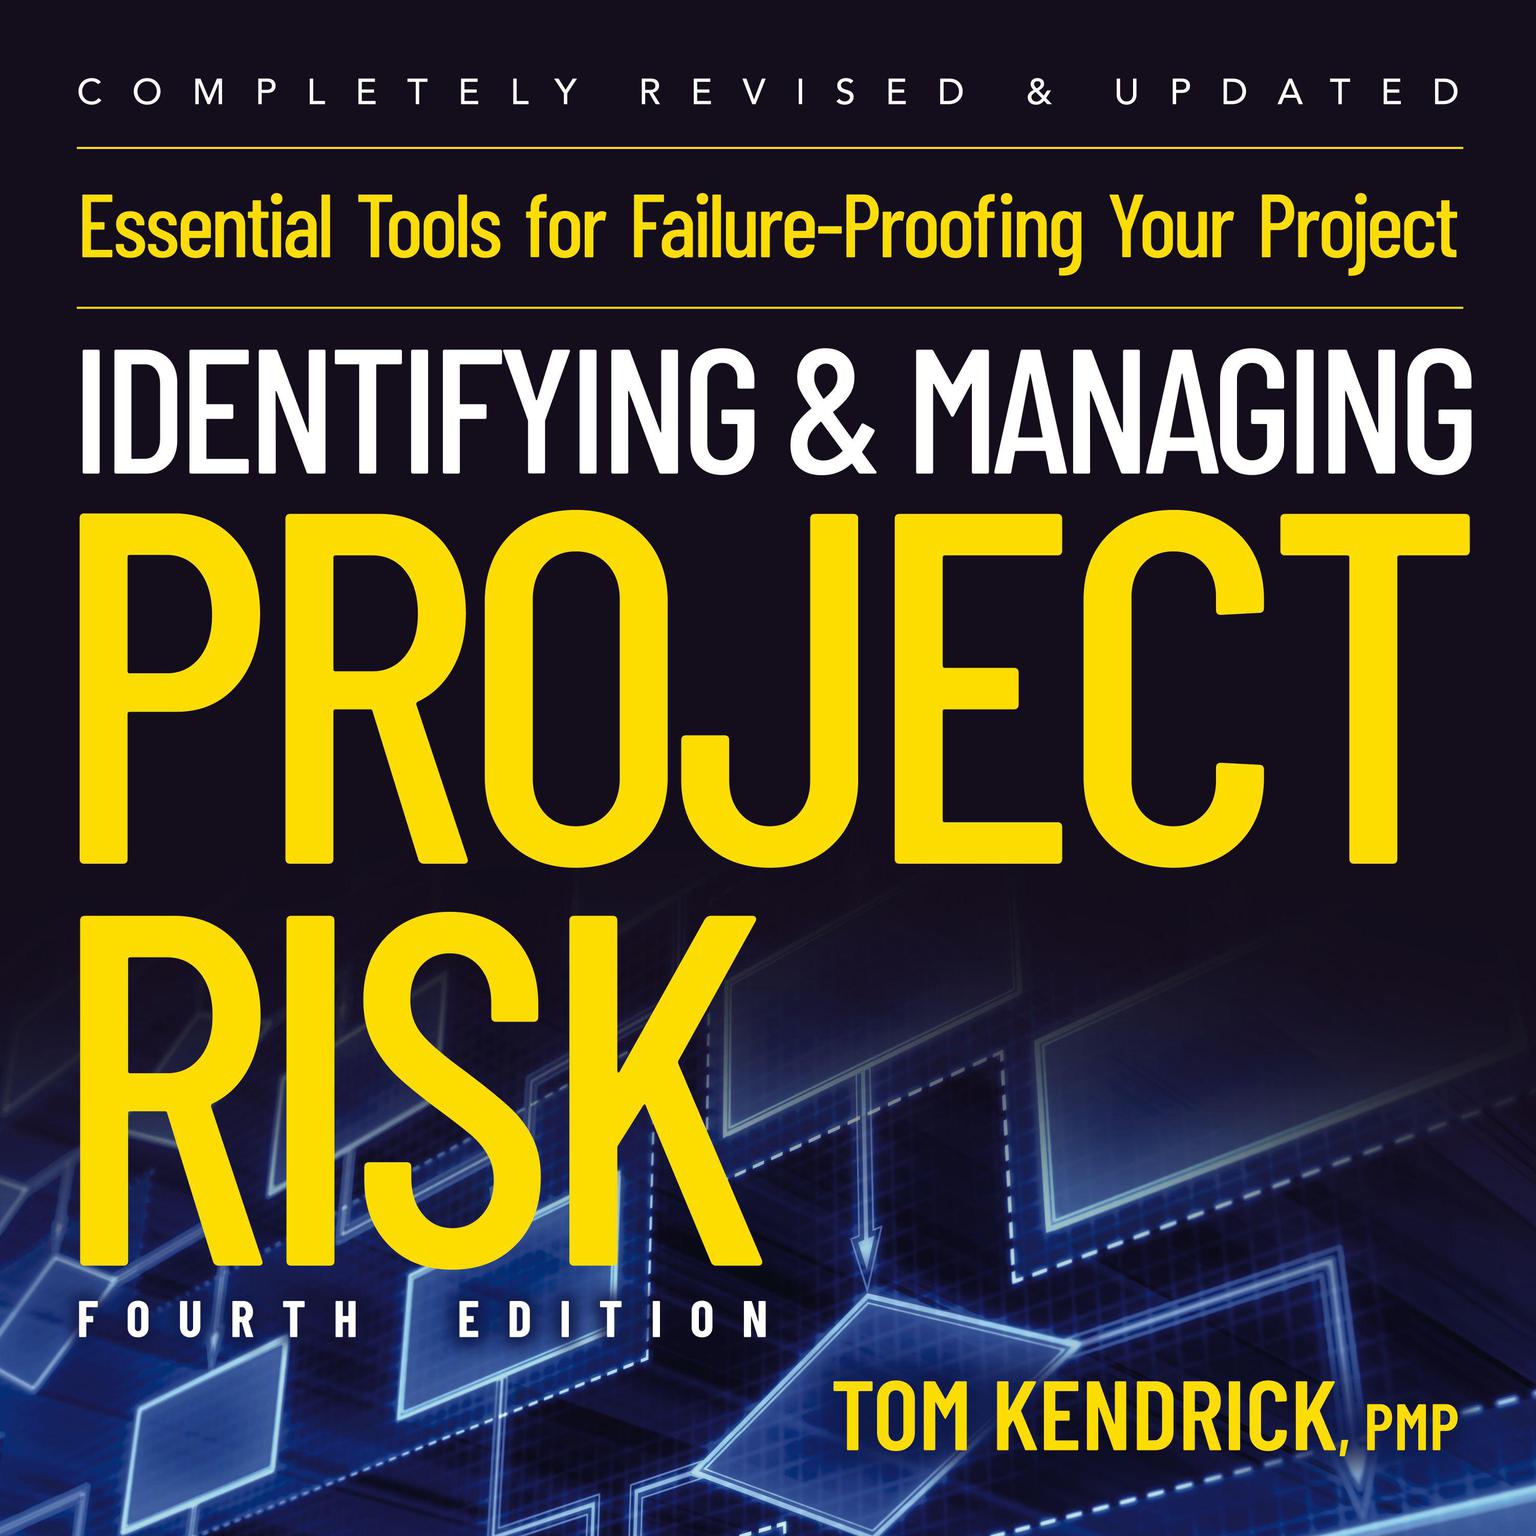 Identifying and Managing Project Risk 4th Edition: Essential Tools for Failure-Proofing Your Project Audiobook, by Tom Kendrick